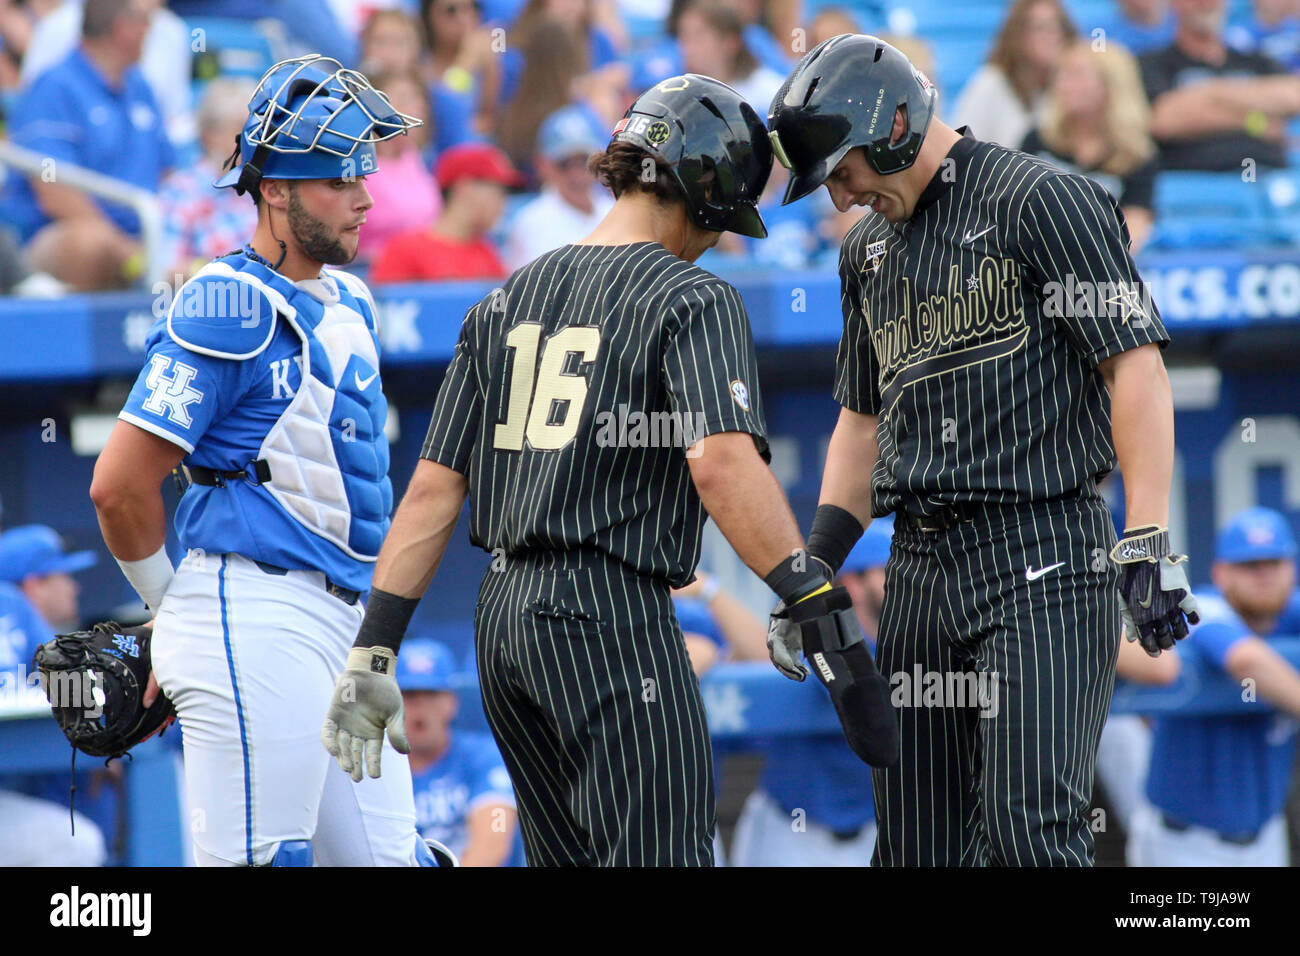 Lexington, KY, USA. 17th May, 2019. Vanderbilt's Austin Martin (16) and JJ Bleday (right) celebrate Bleday's home run while Kentucky's Coltyn Kessler looks on during a game between the Kentucky Wildcats and the Vanderbilt Commodores at Kentucky Pride Park in Lexington, KY. Kevin Schultz/CSM/Alamy Live News Stock Photo